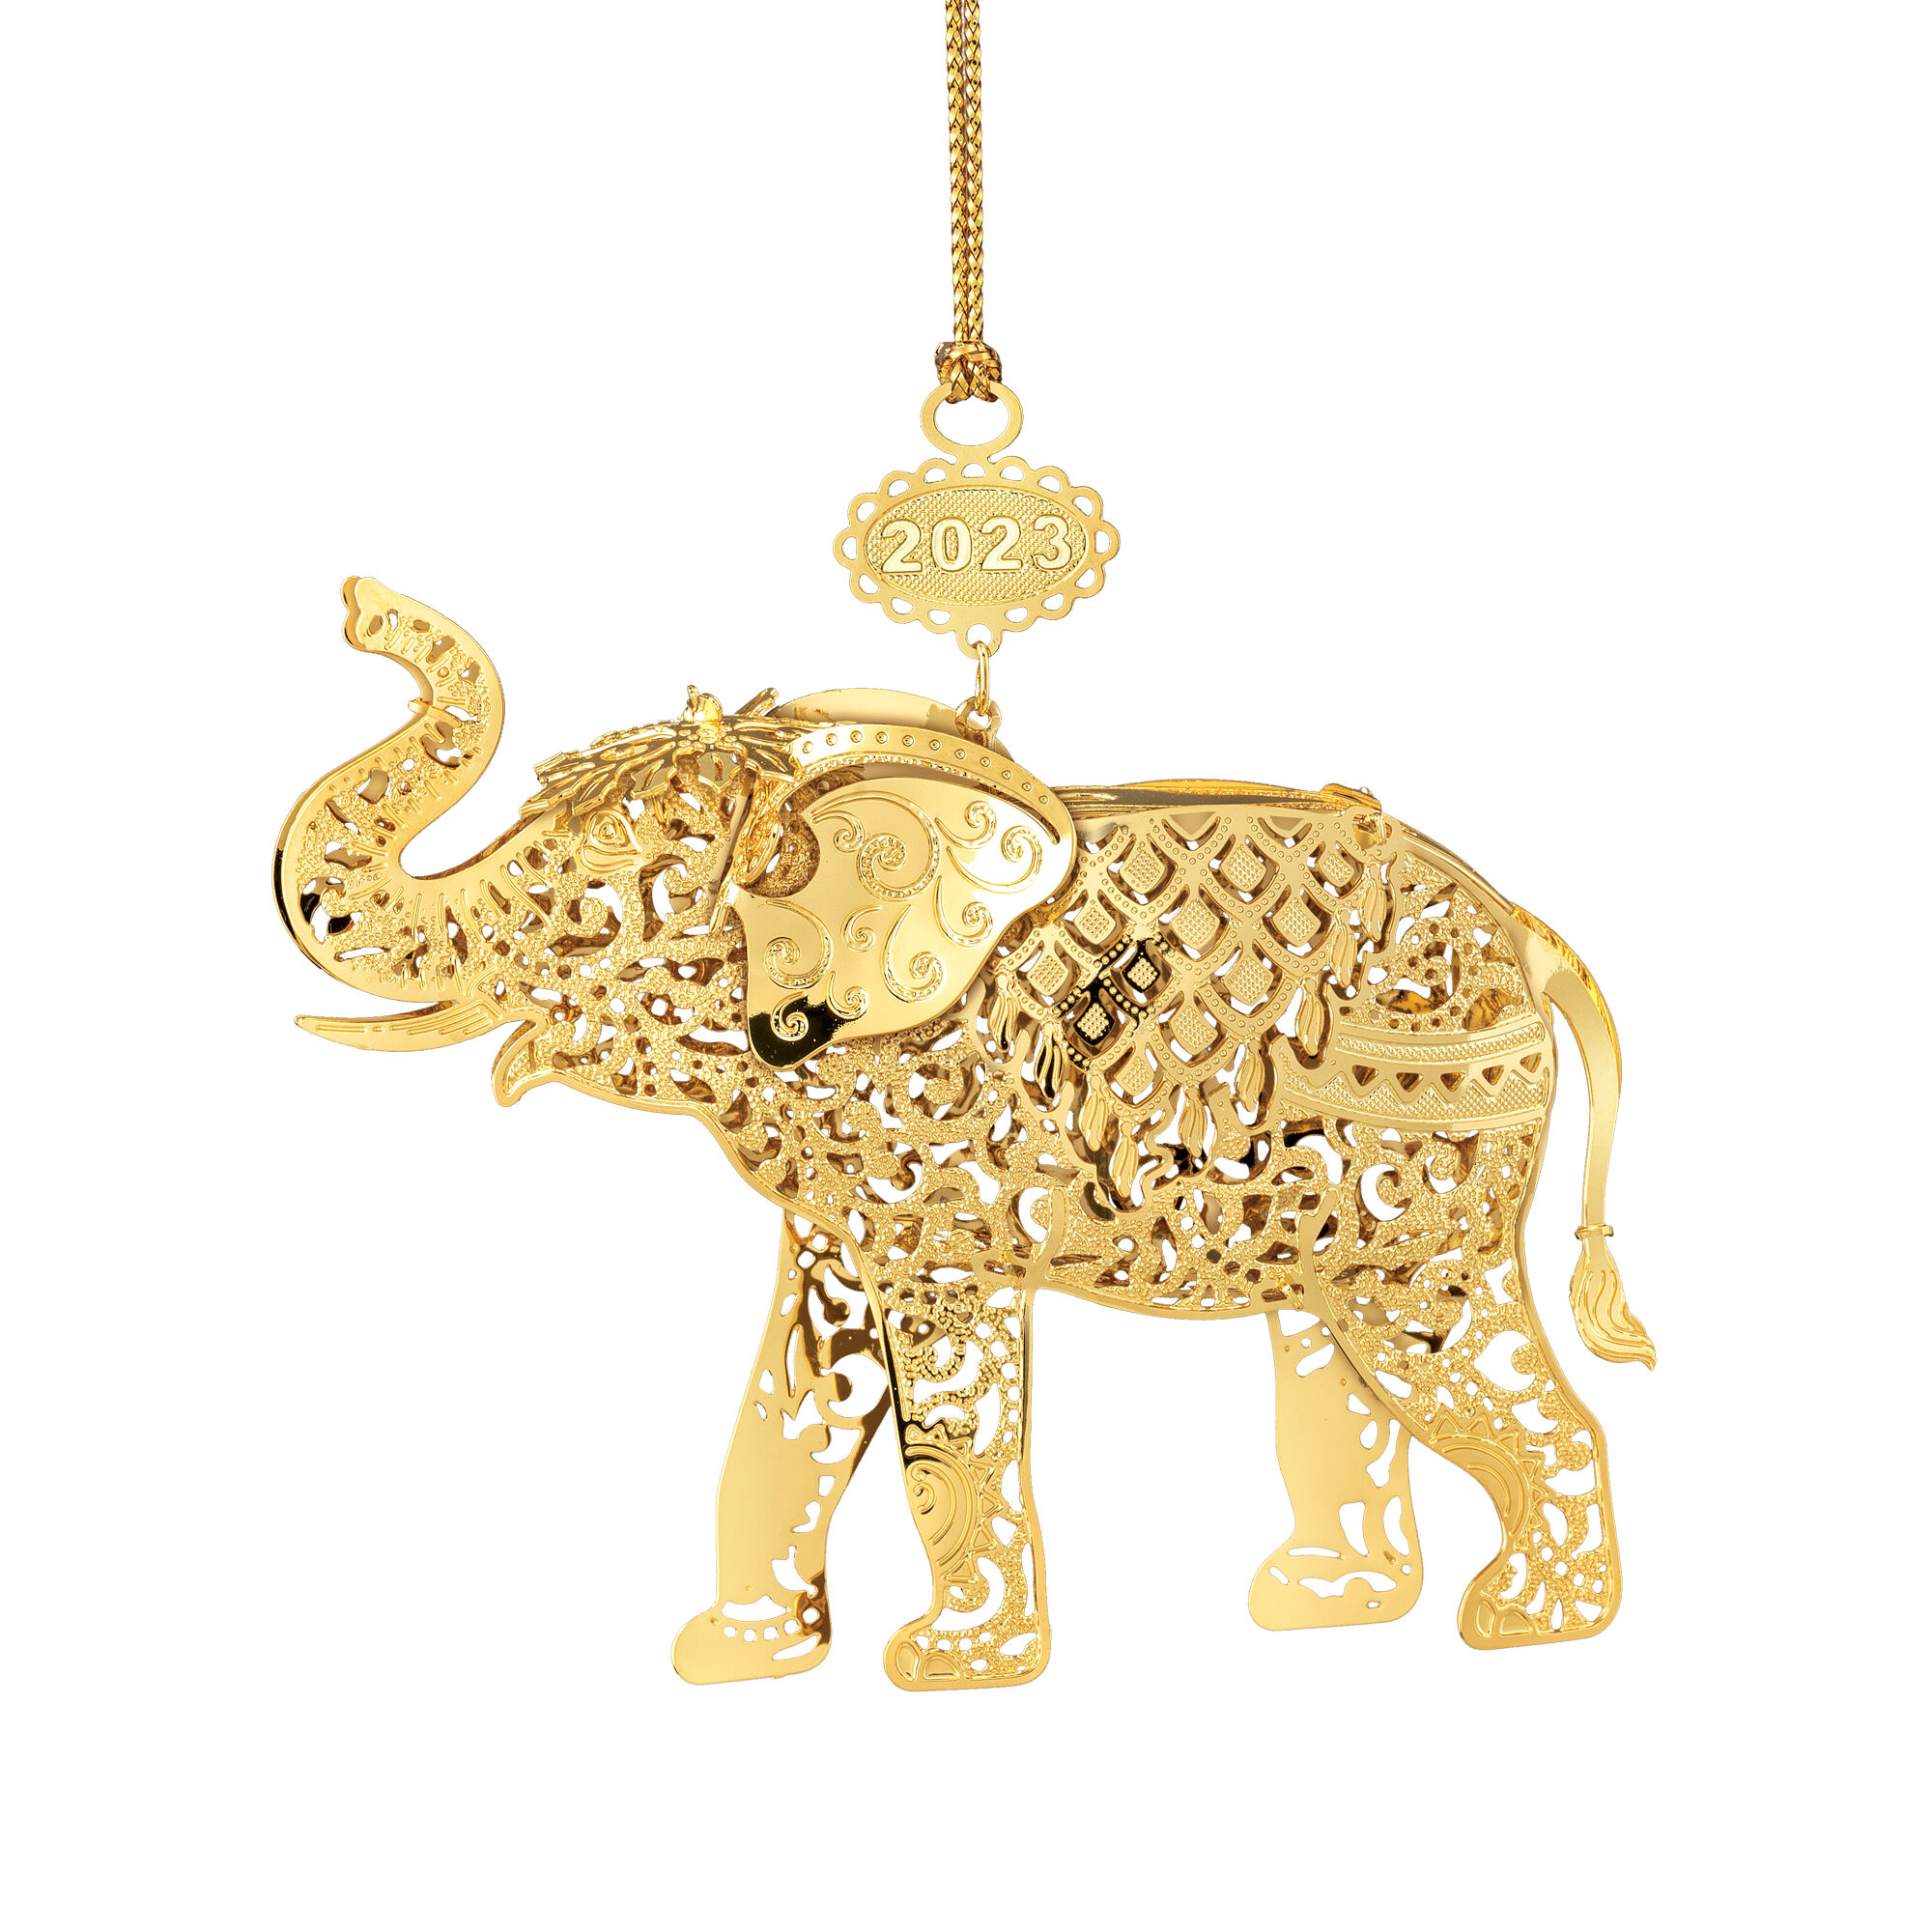 The 2023 Gold Christmas Ornament Collection 10312 0036 e elephant